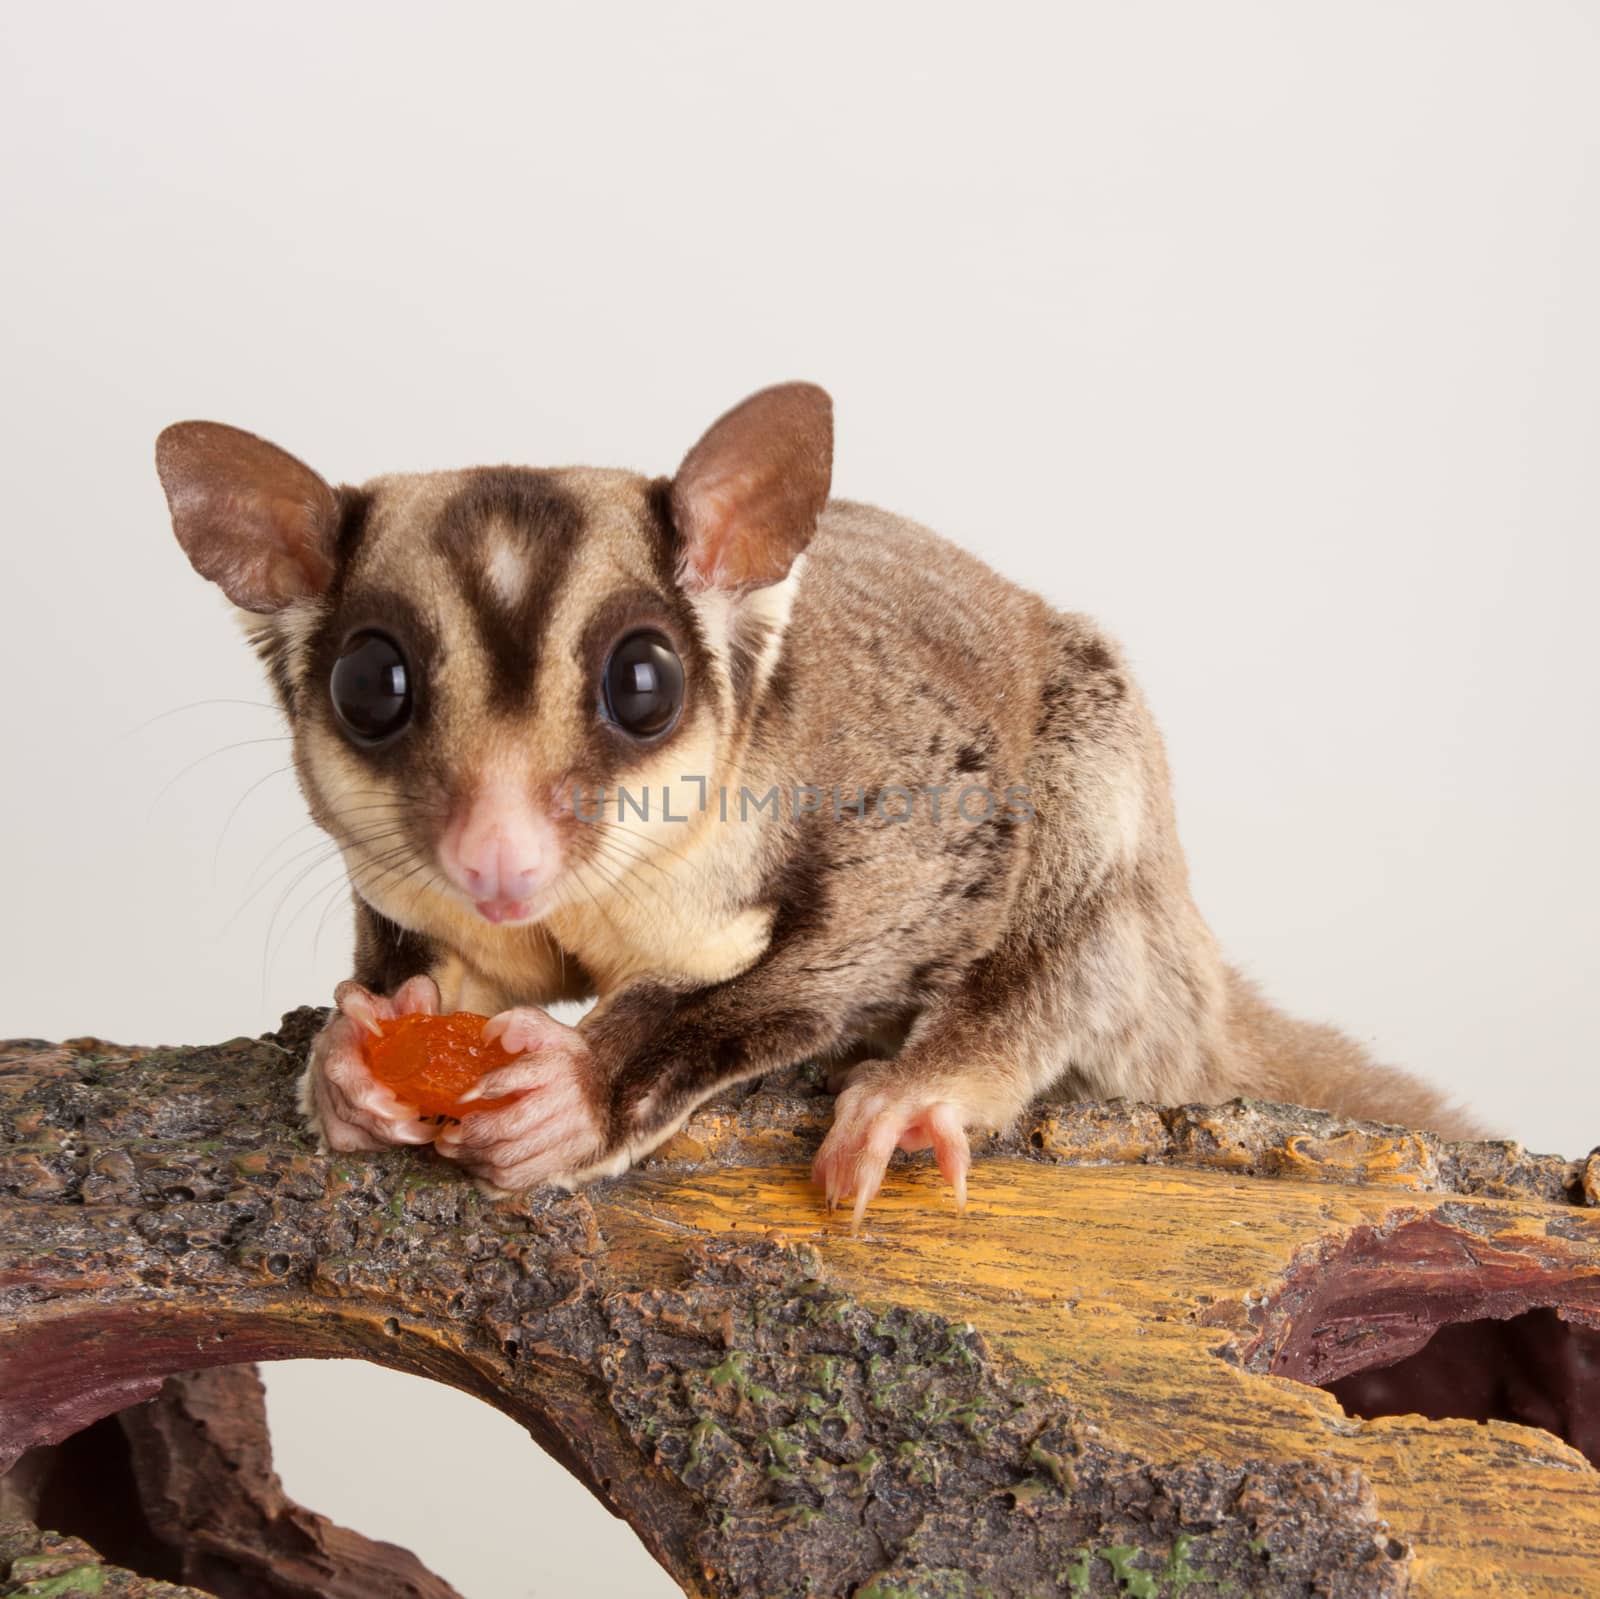 Domestic sugar glider rodent domestic animal by lanalanglois